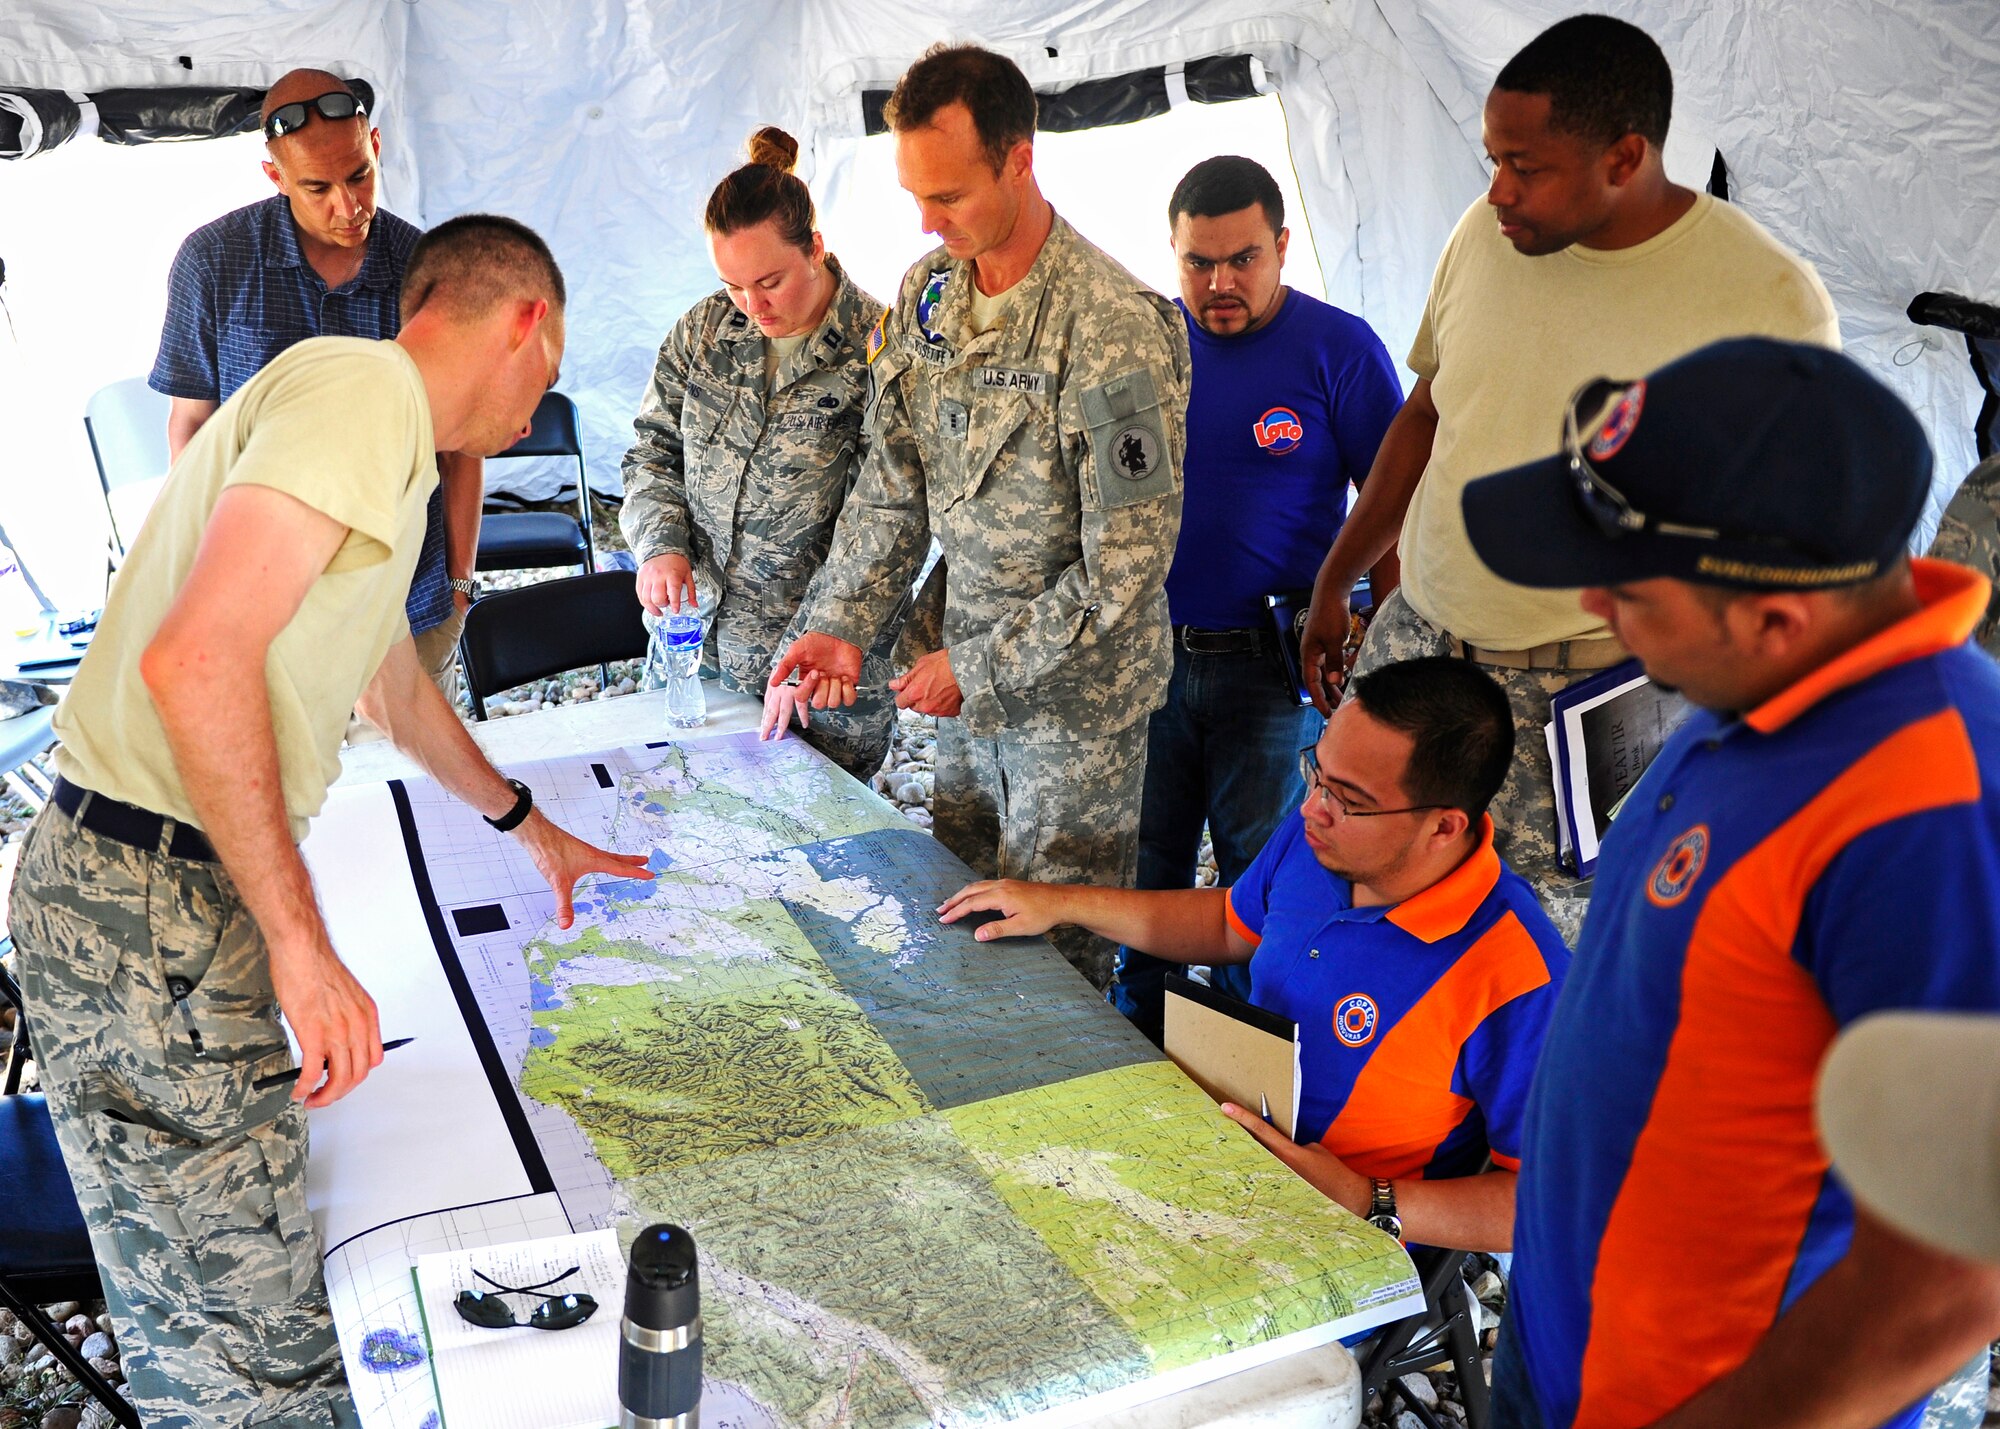 The CENTAM Survey and Assessment Team and the Honduran Comision Permanente de Contingencias look over a map of the affected area during a simulated hurricane disaster response exercise at Puerto Castilla, Honduras, May 15. The C-SAT team responds to a natural disaster and humanitarian assistance notification in the Central America Region to conduct an assessment of the area before military forces are deployed.(Air Force photo by Staff Sgt. Eric Donner)